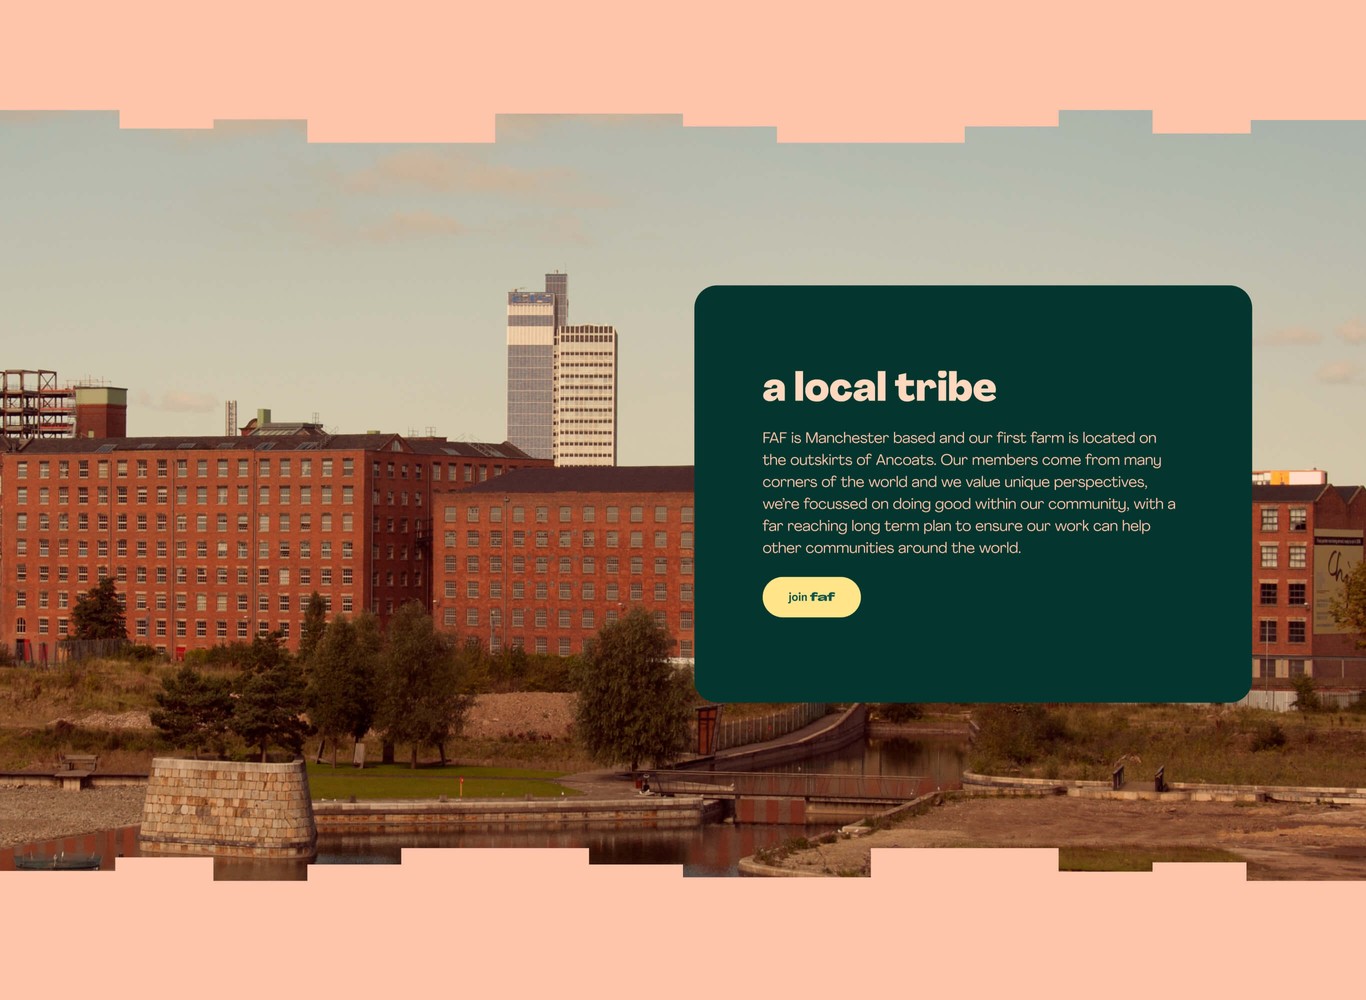 Desktop: a local tribe with photography of the Ancoats area.